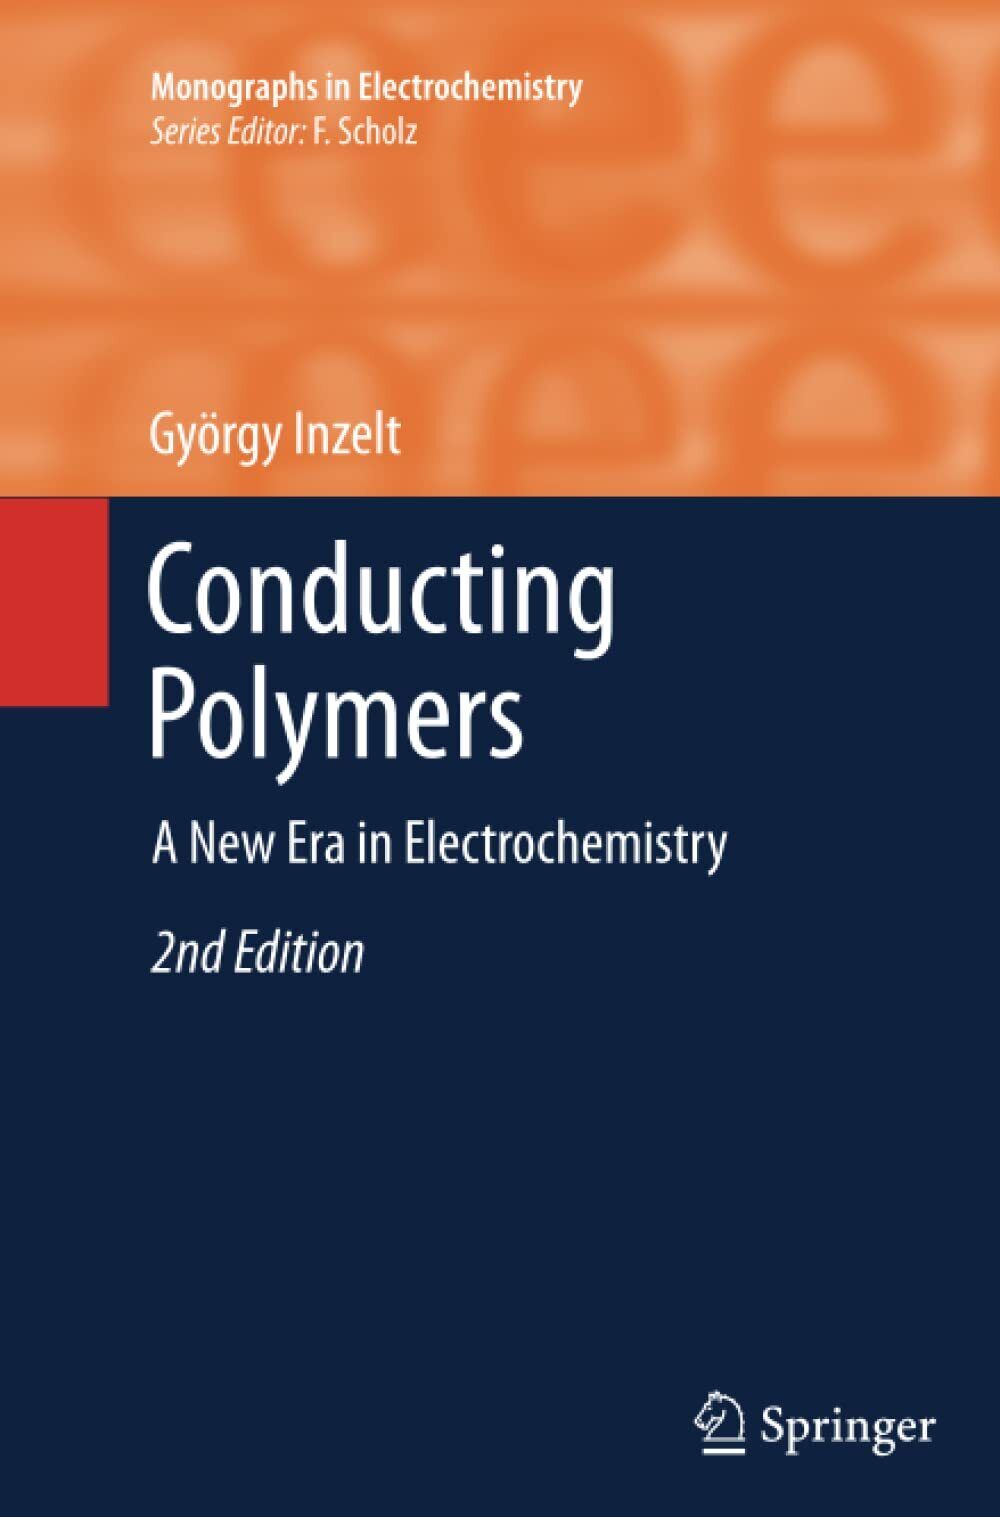 Conducting Polymers - Gy?rgy Inzelt - Springer, 2014